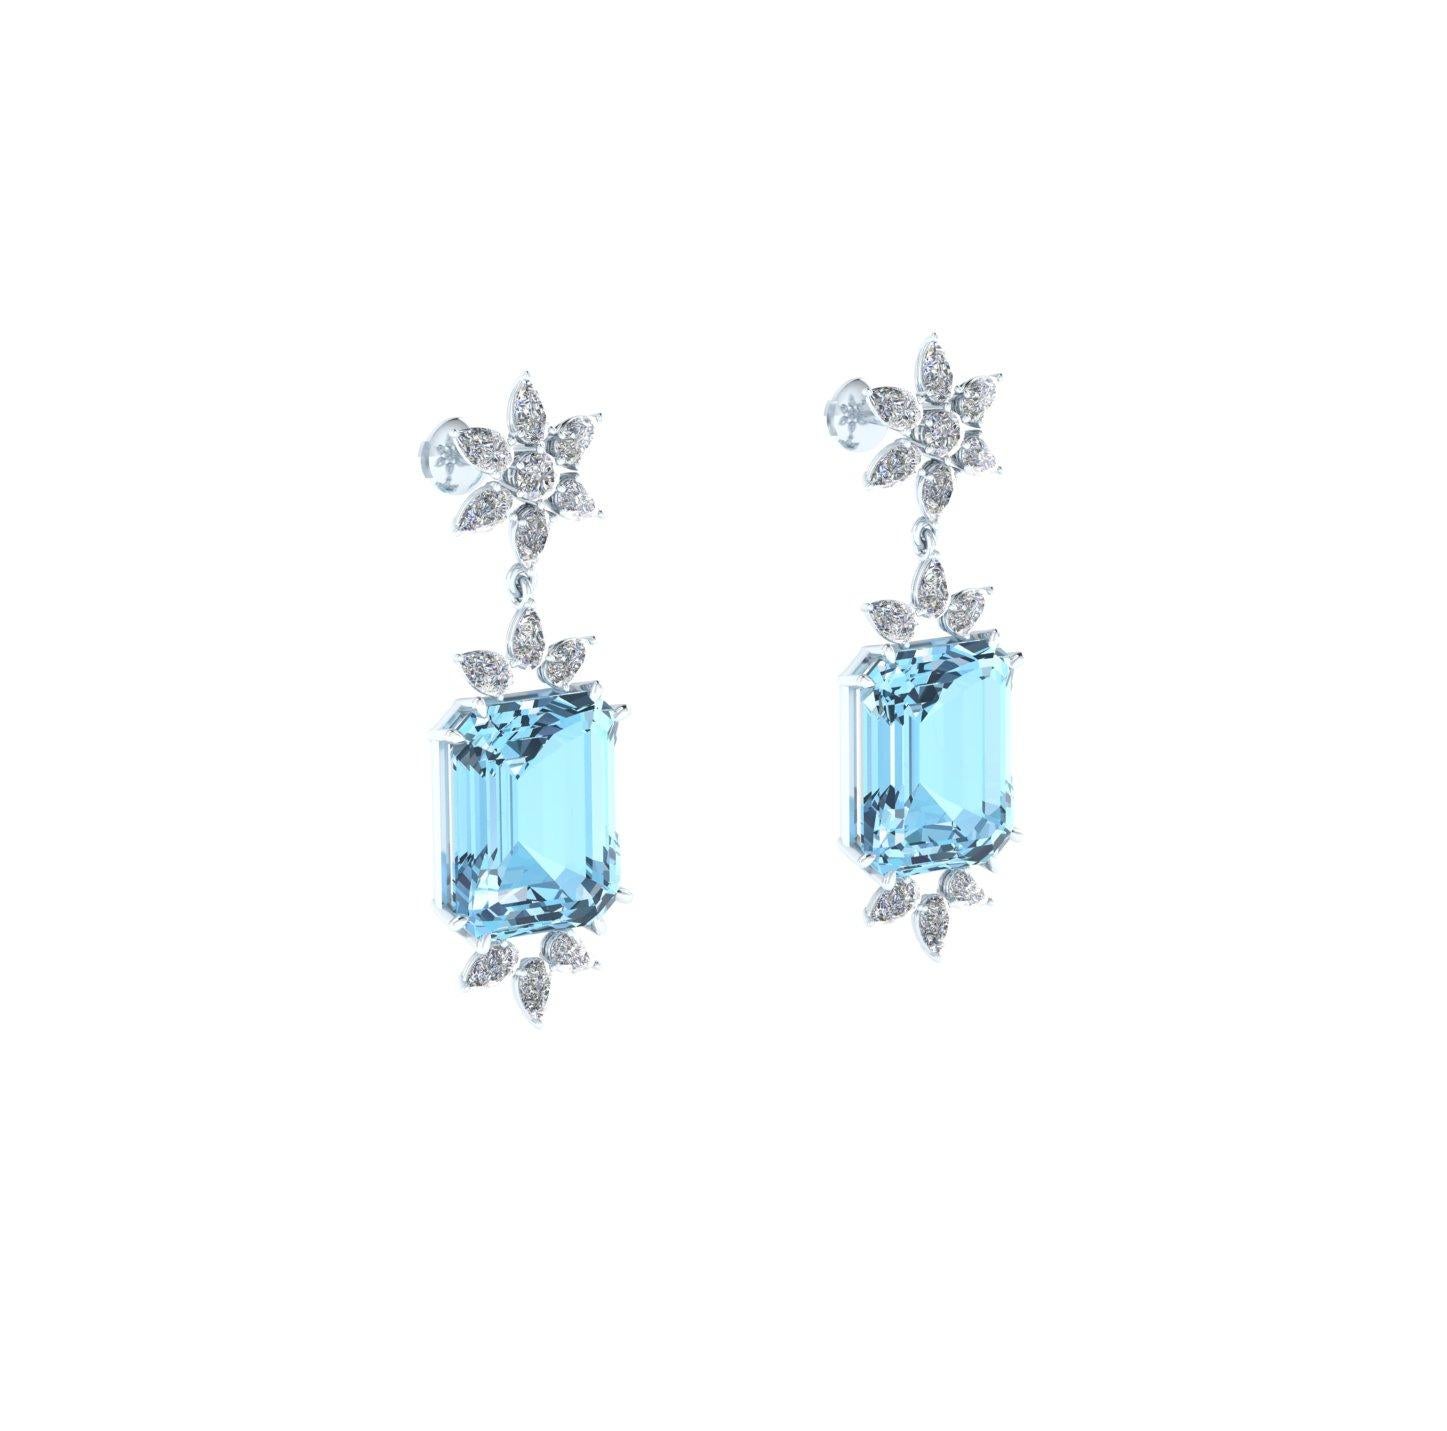 Ferrucci 19.5 Carats Emerald Cut Aquamarine and Drop Diamonds 18k Gold Earrings In New Condition For Sale In New York, NY